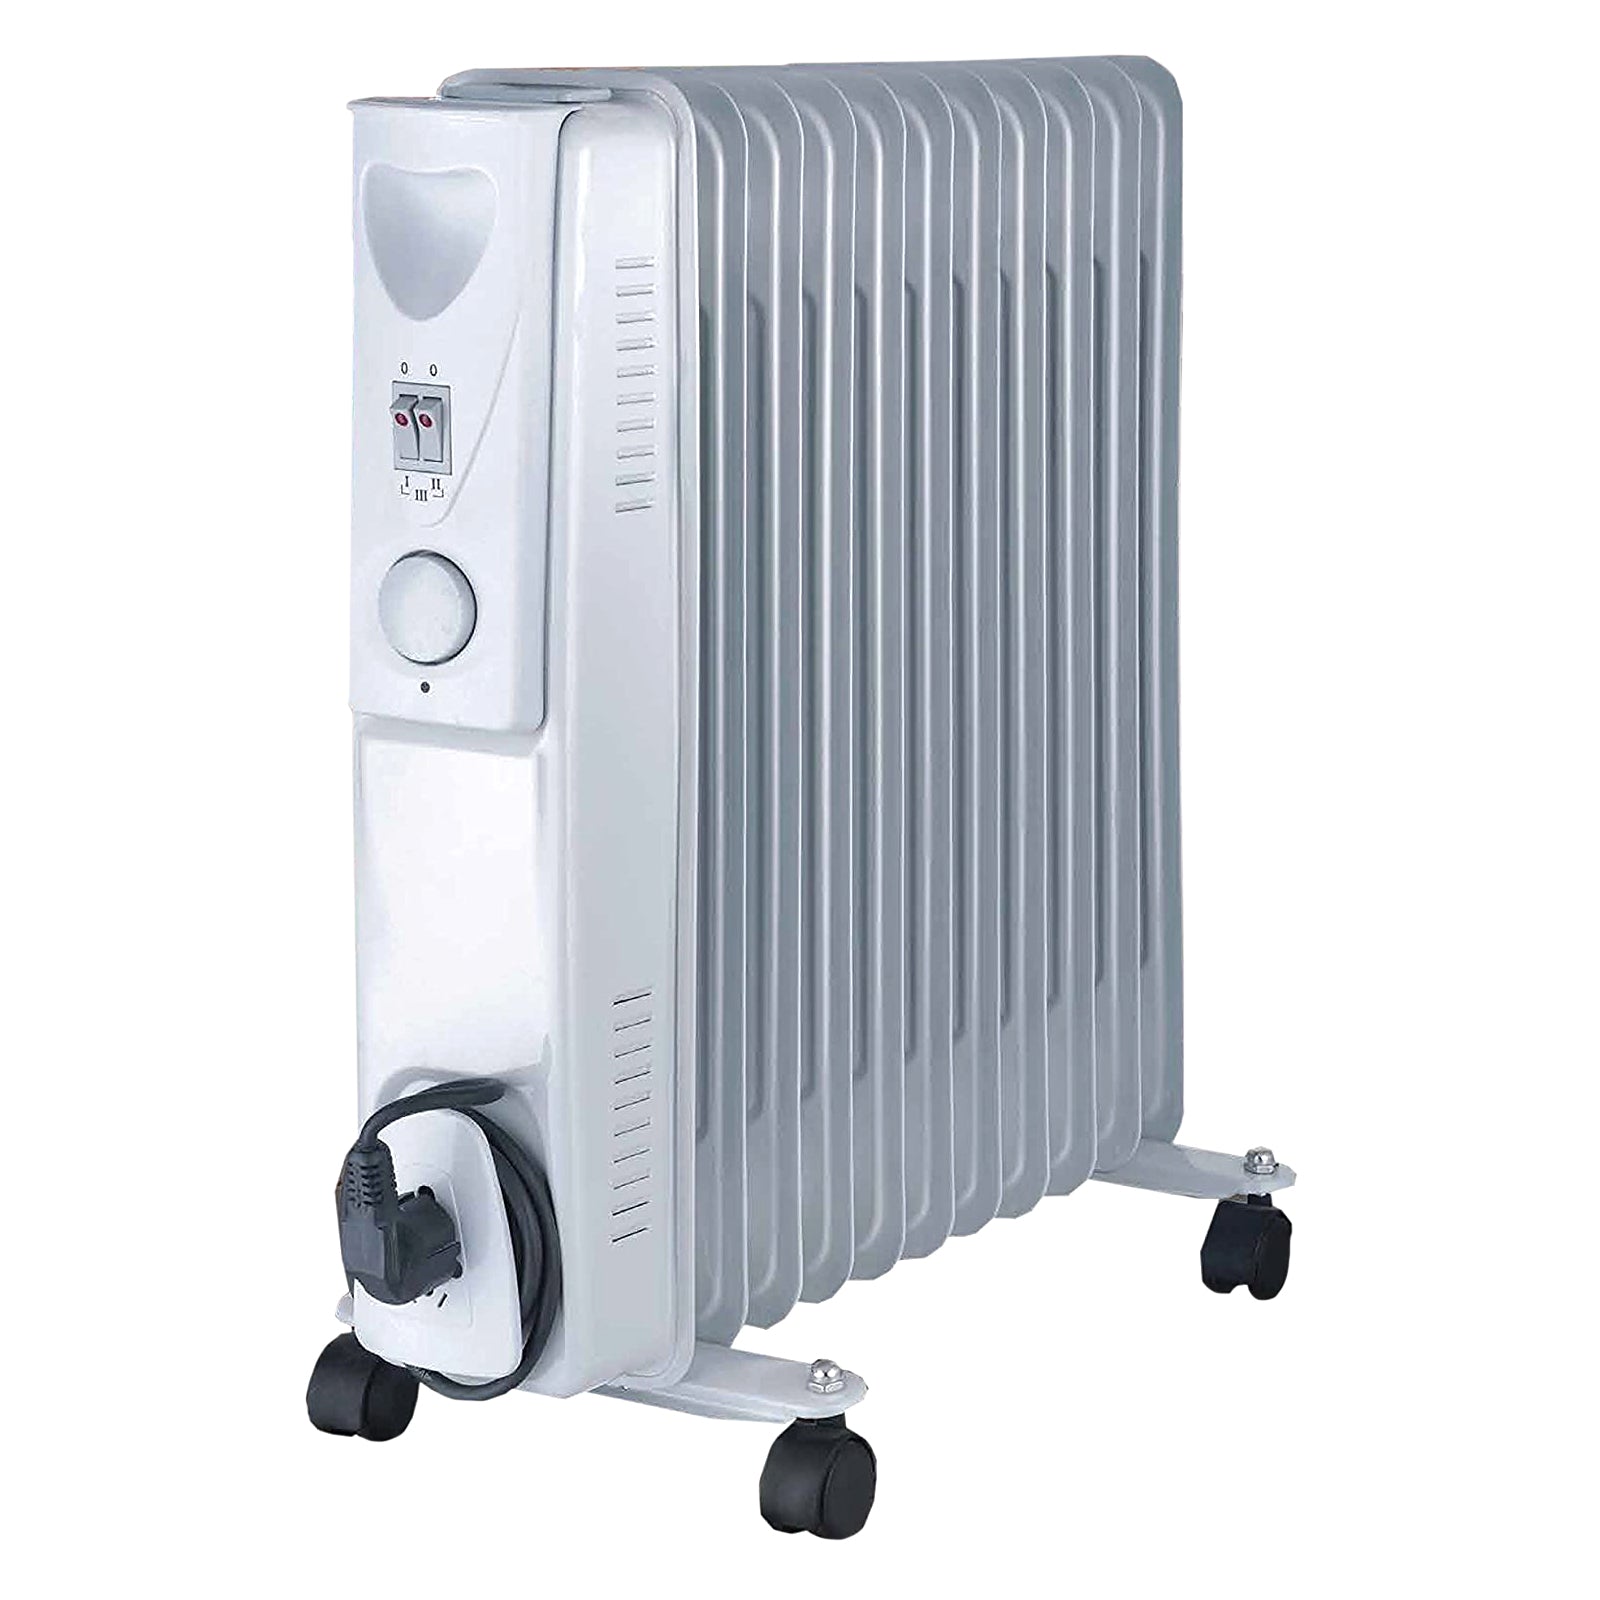 AMOS 11 Fin 2500W Oil Filled Radiator 3 Setting Thermostat Home Office Heater